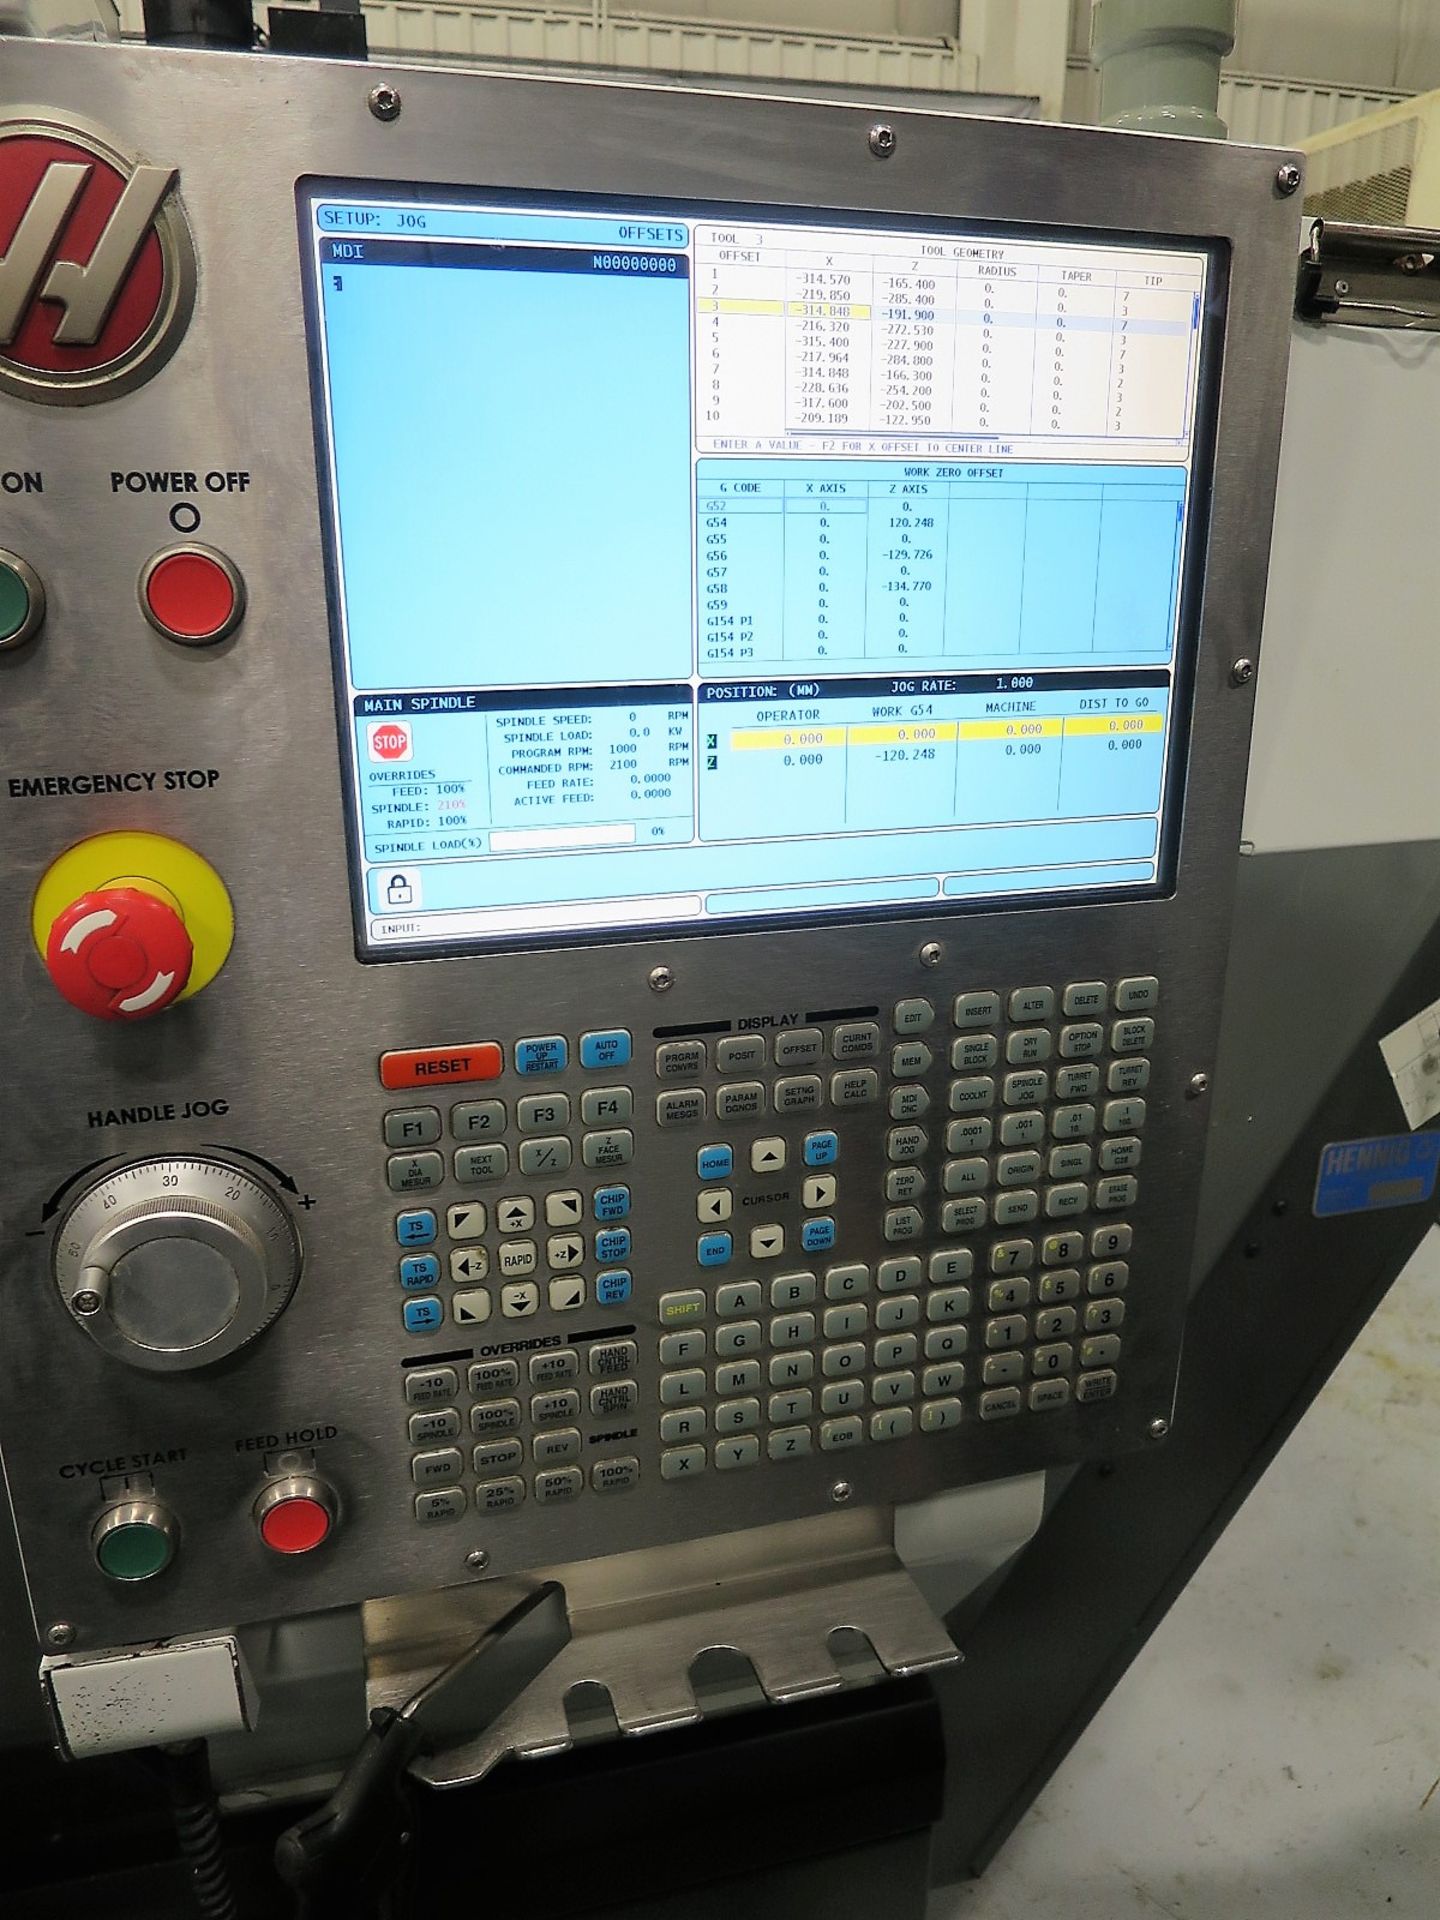 Haas ST-10 CNC 2-Axis Turning Center Lathe, S/N 3095012, New 2013 - Image 2 of 10